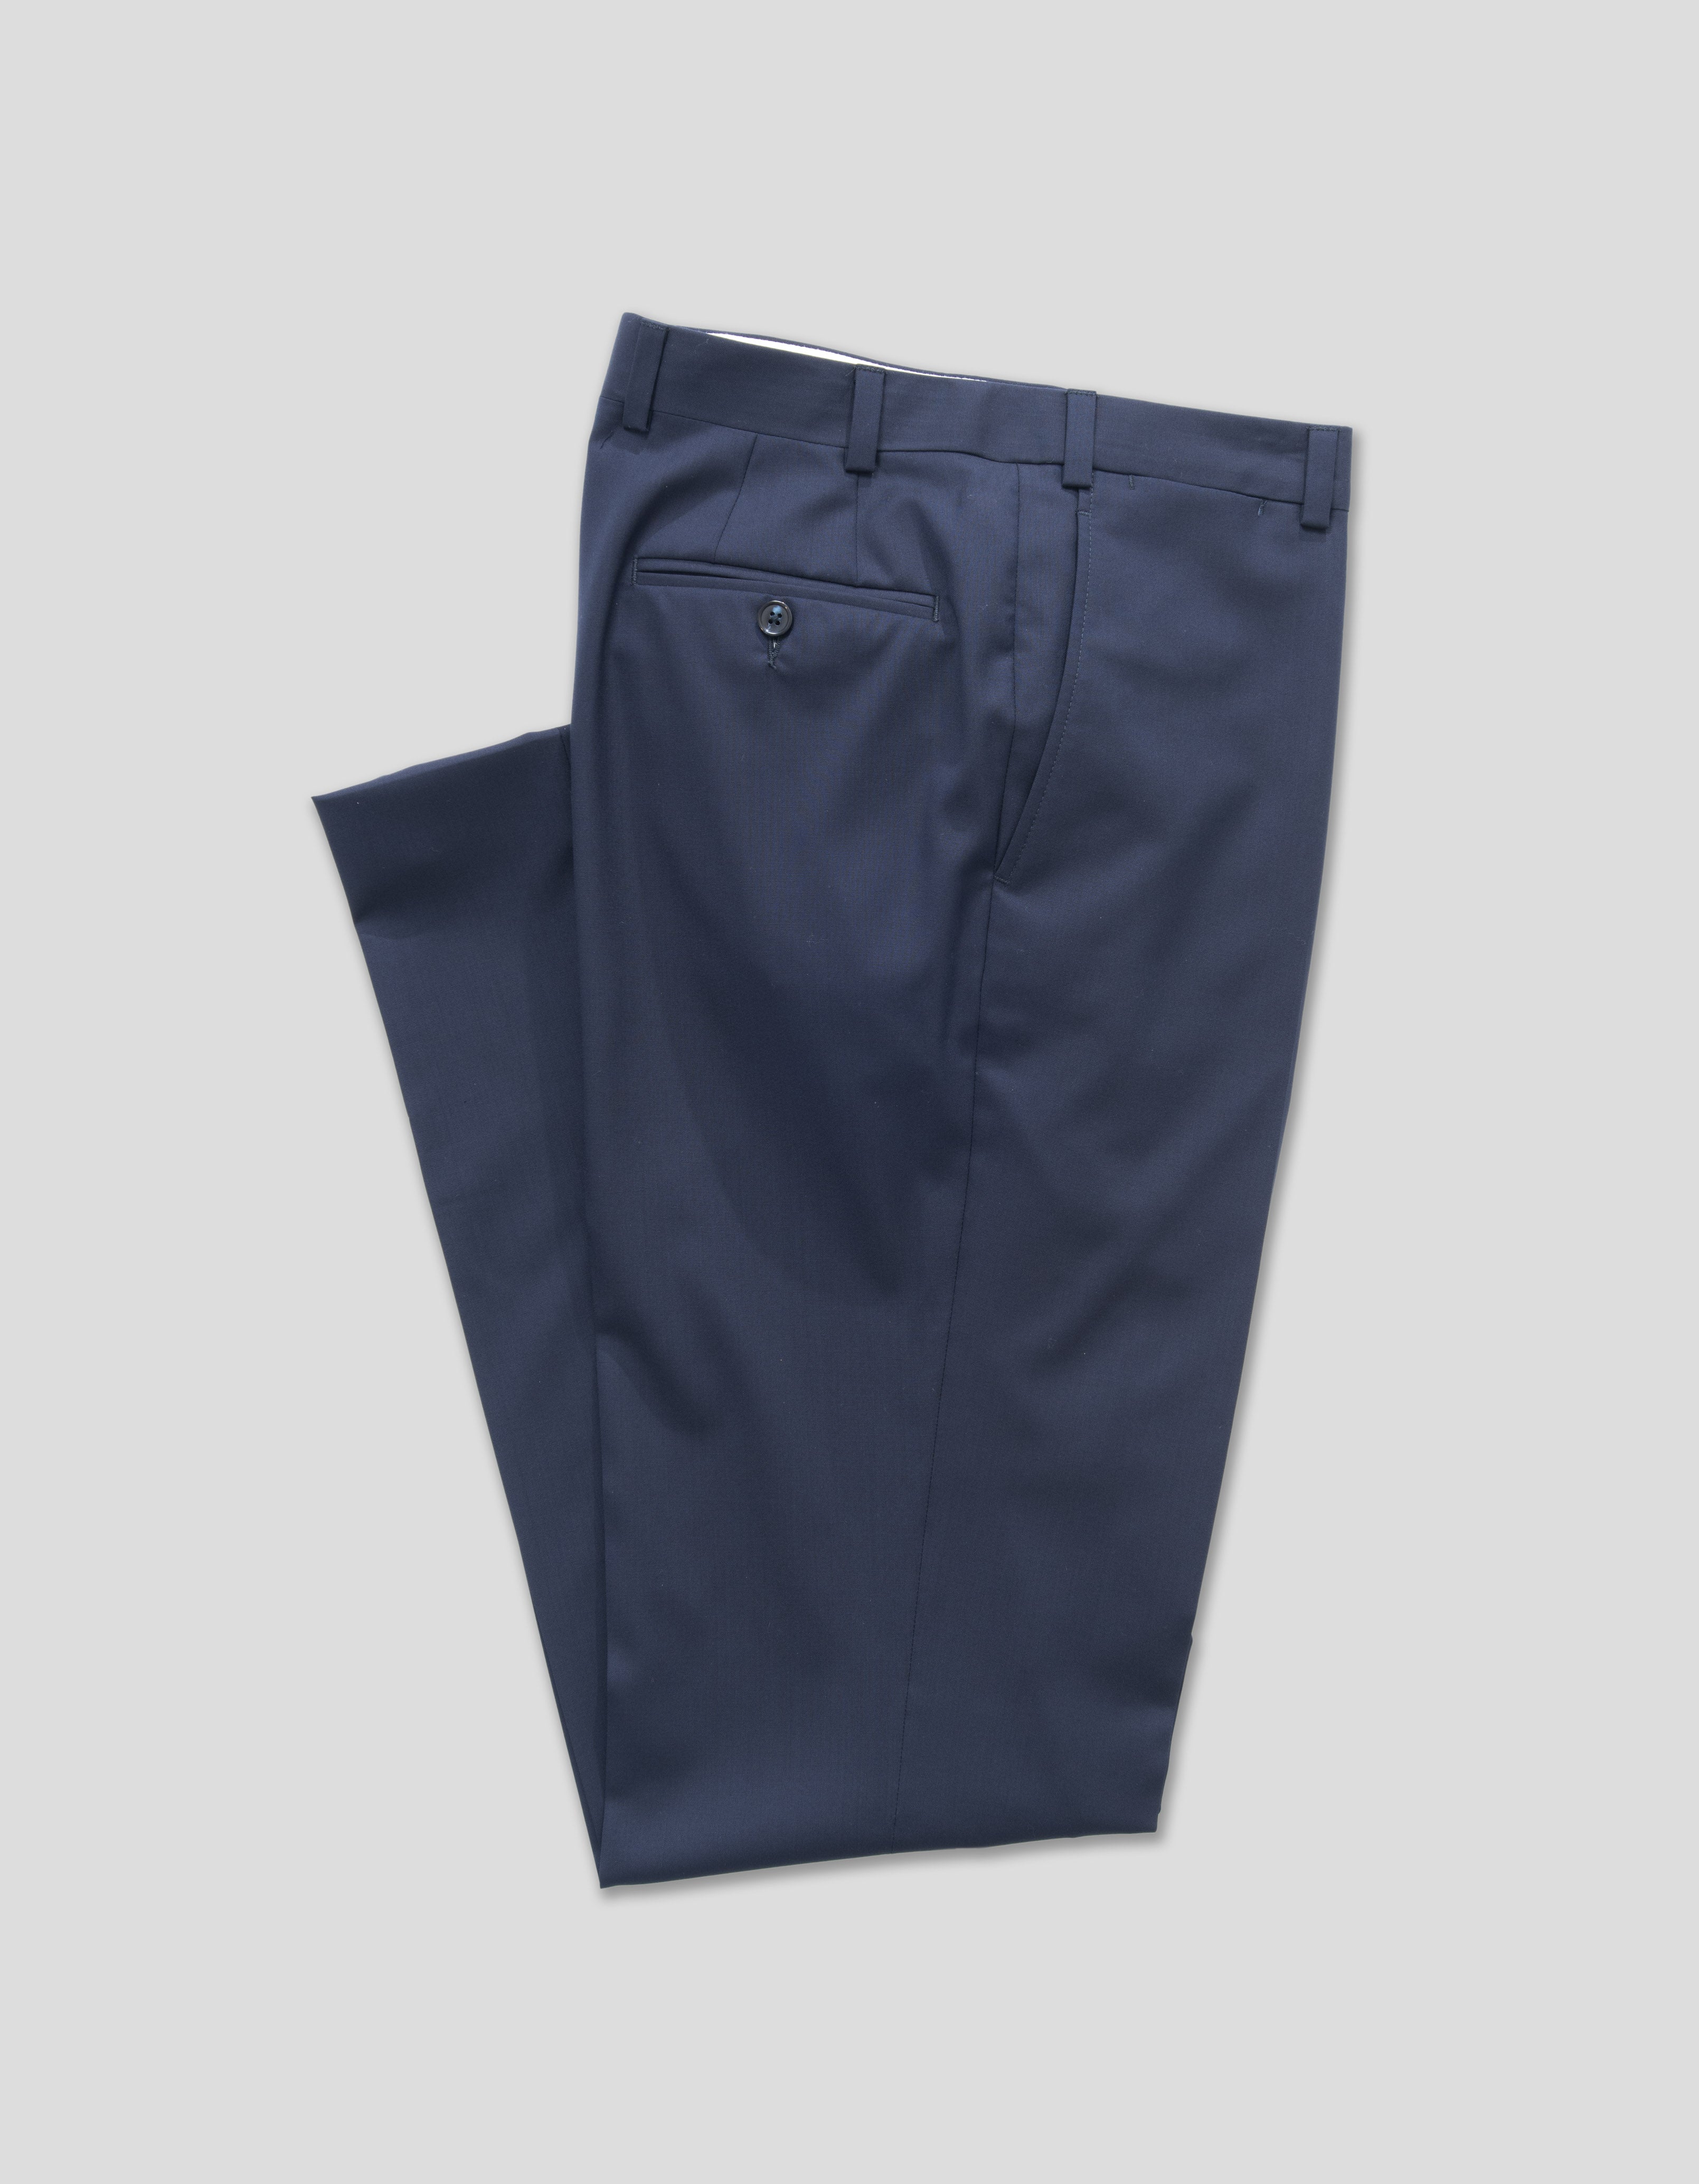 Charcoal Wool Tropical Trousers - Classic Fit | Men's Dress Clothes 